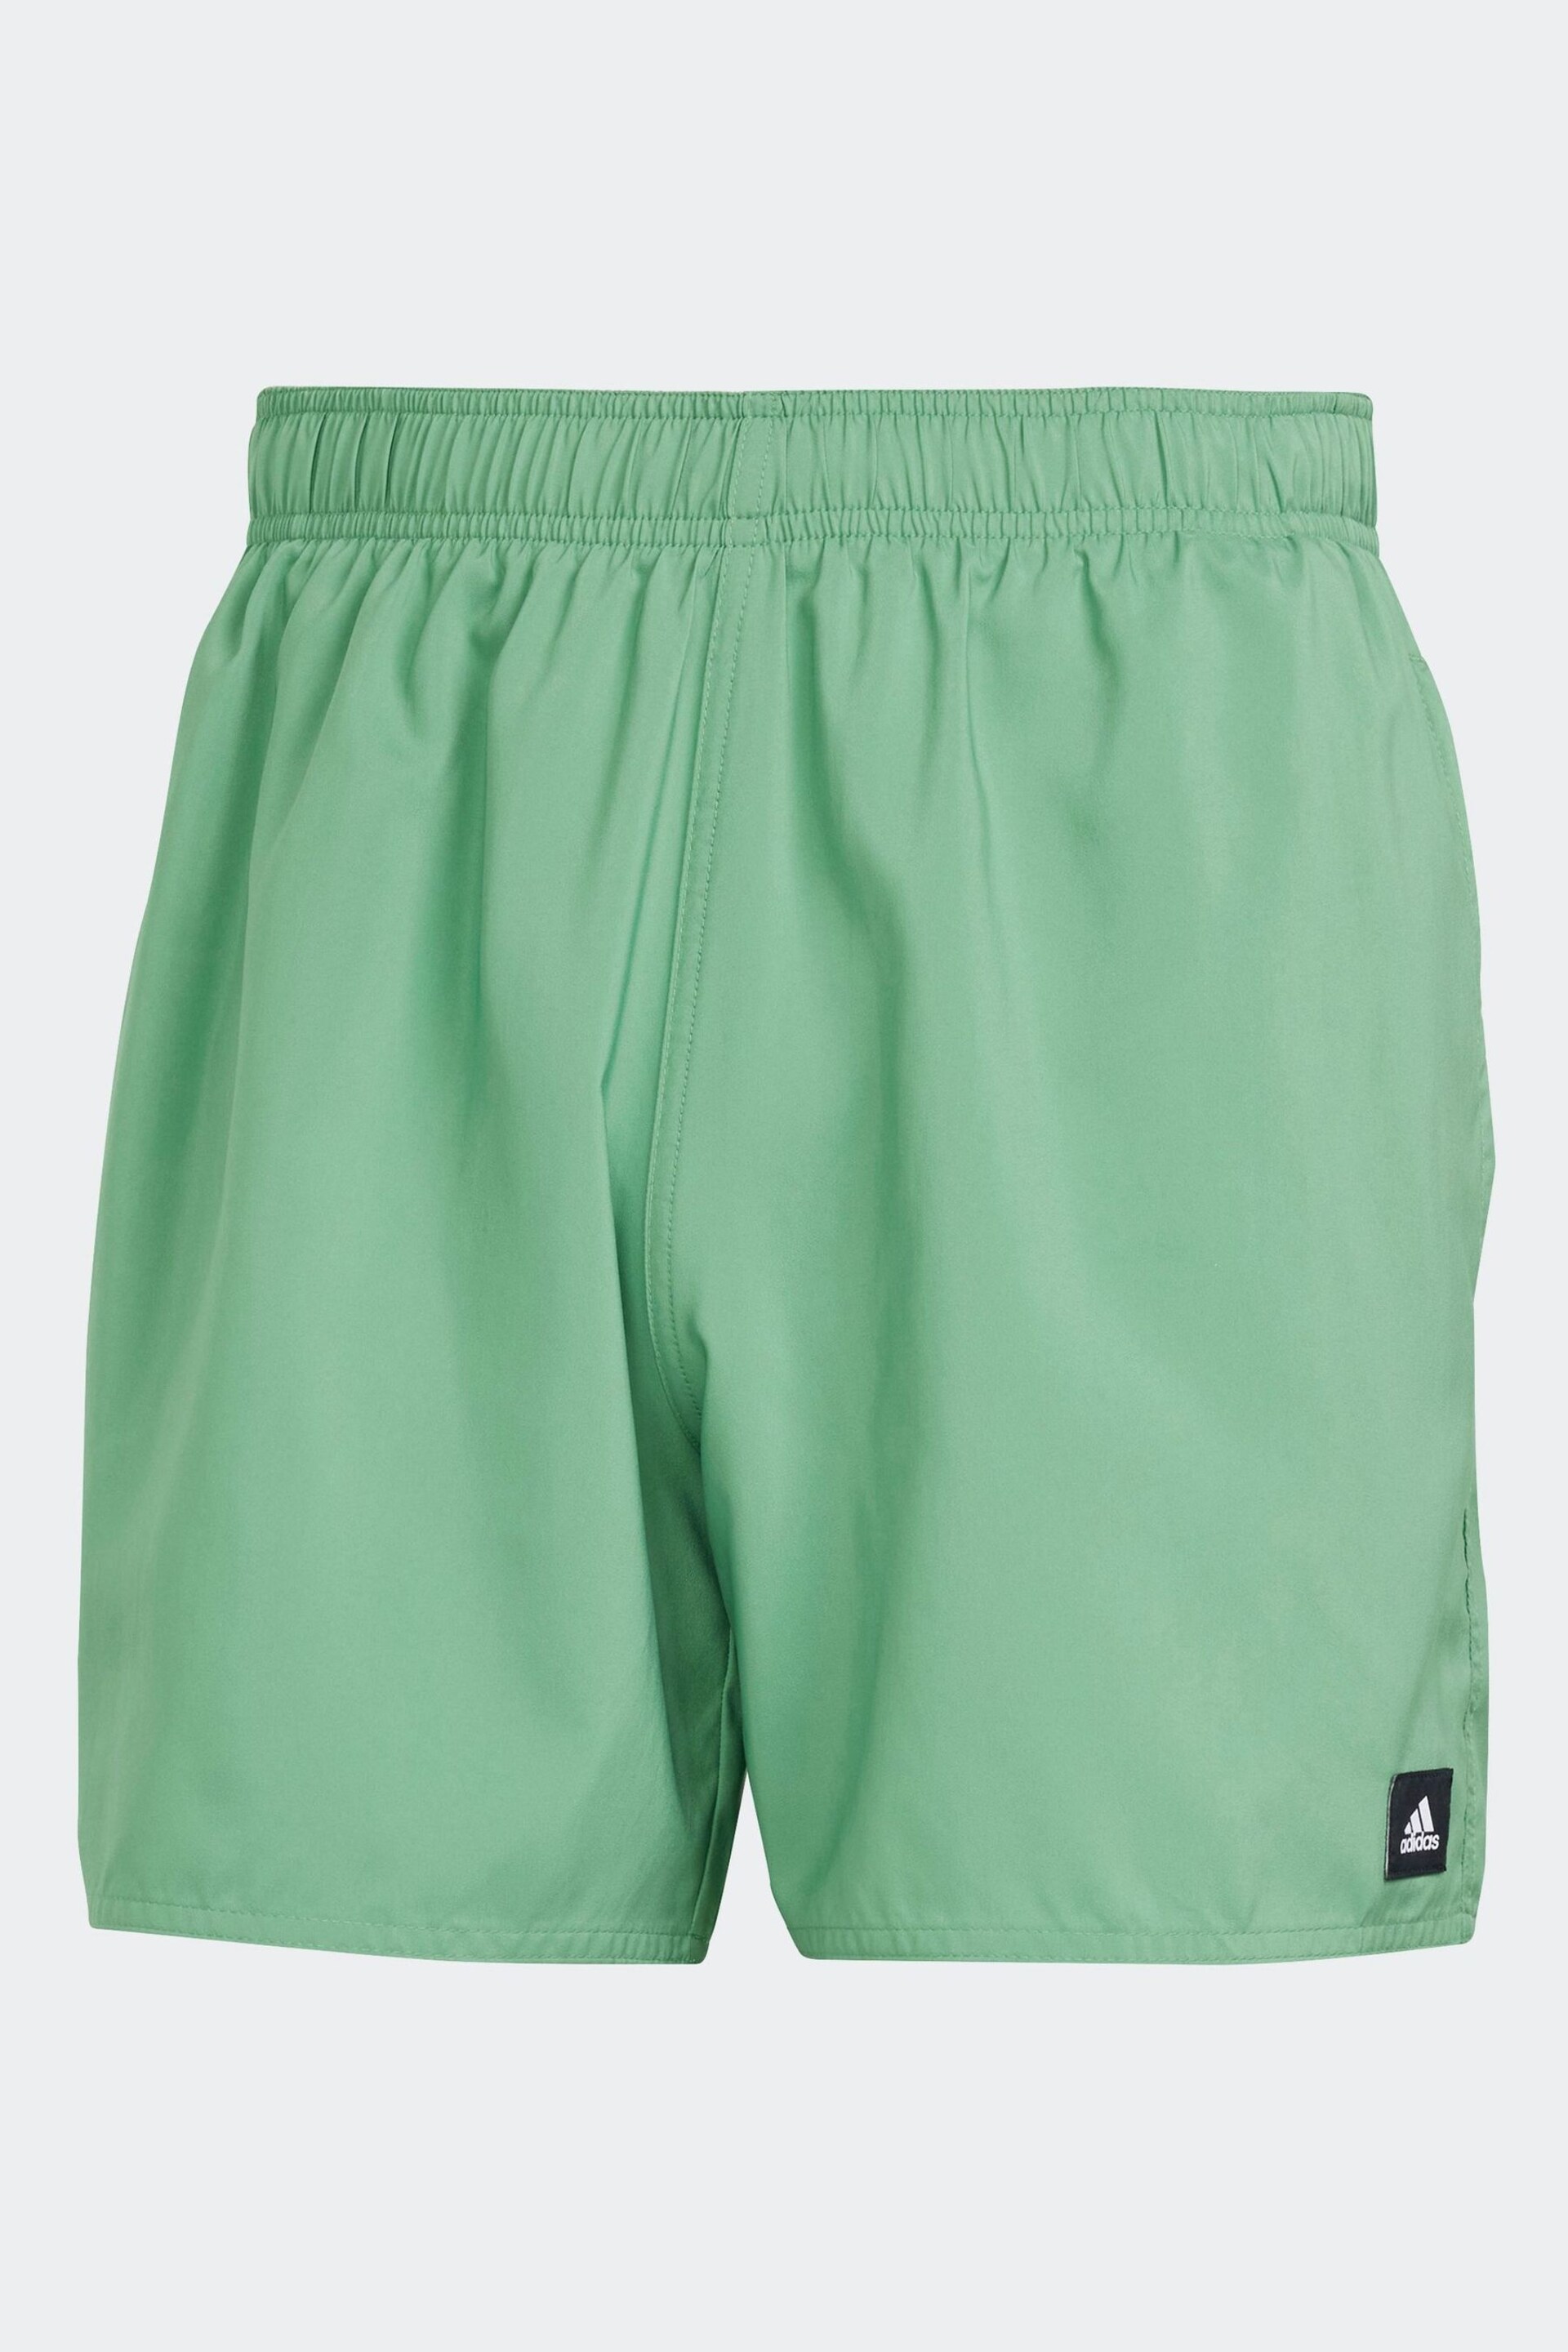 adidas Green Solid CLX Classic Length Swim Shorts - Image 7 of 7